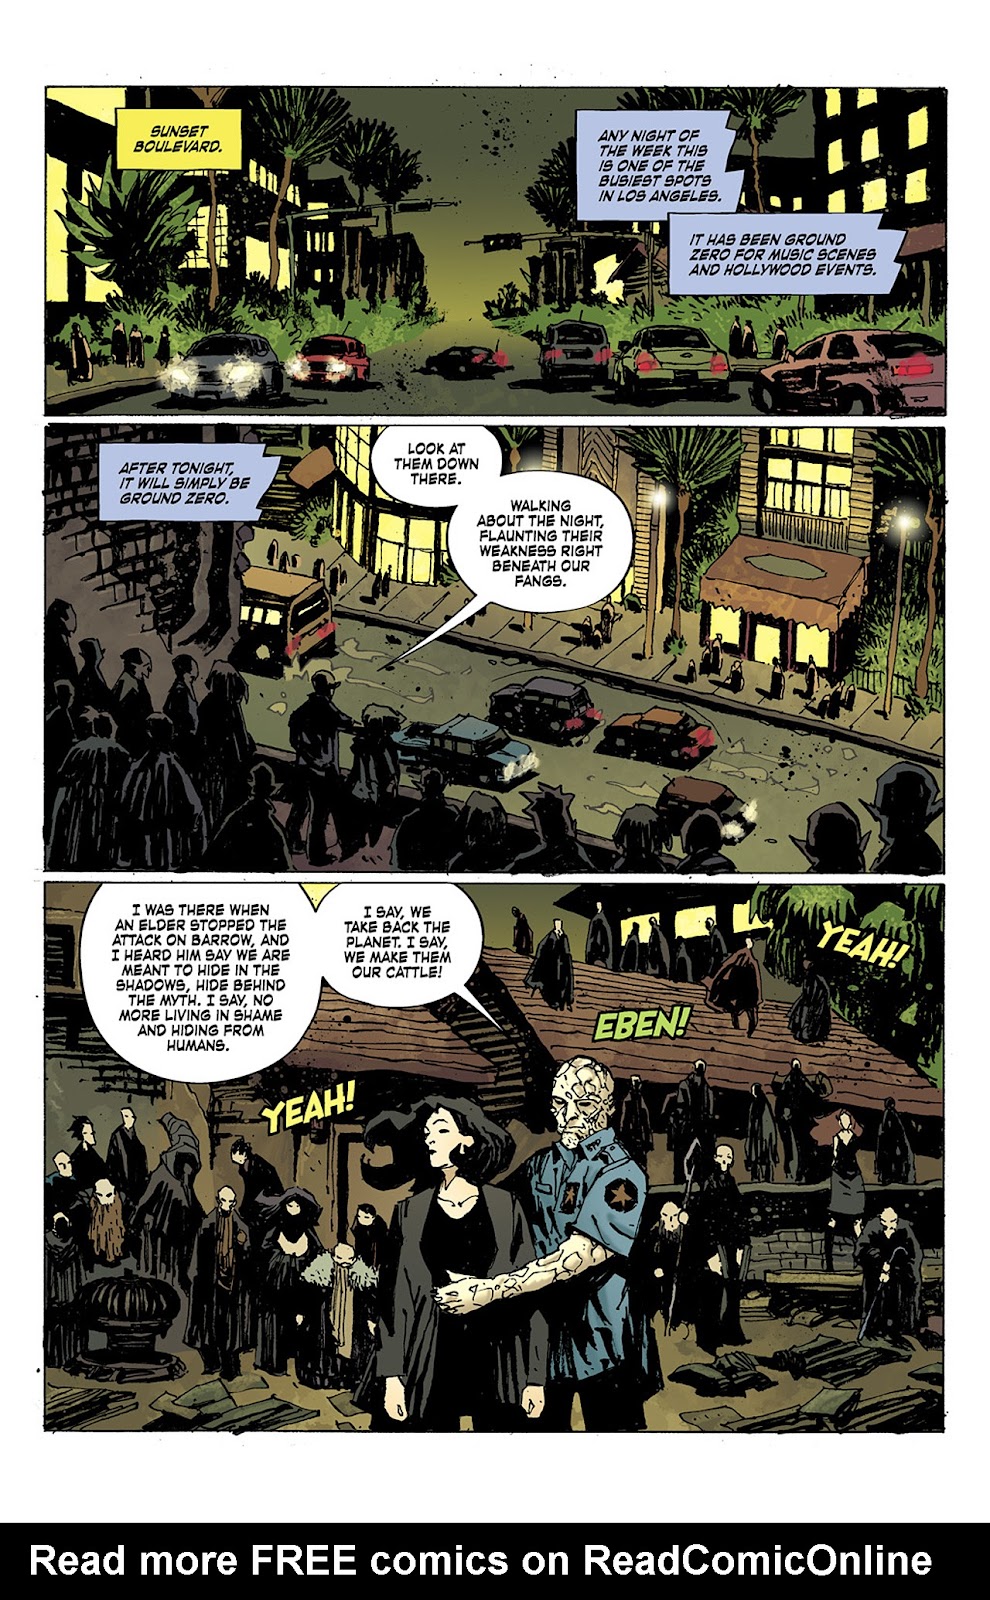 Criminal Macabre: Final Night - The 30 Days of Night Crossover issue 4 - Page 10